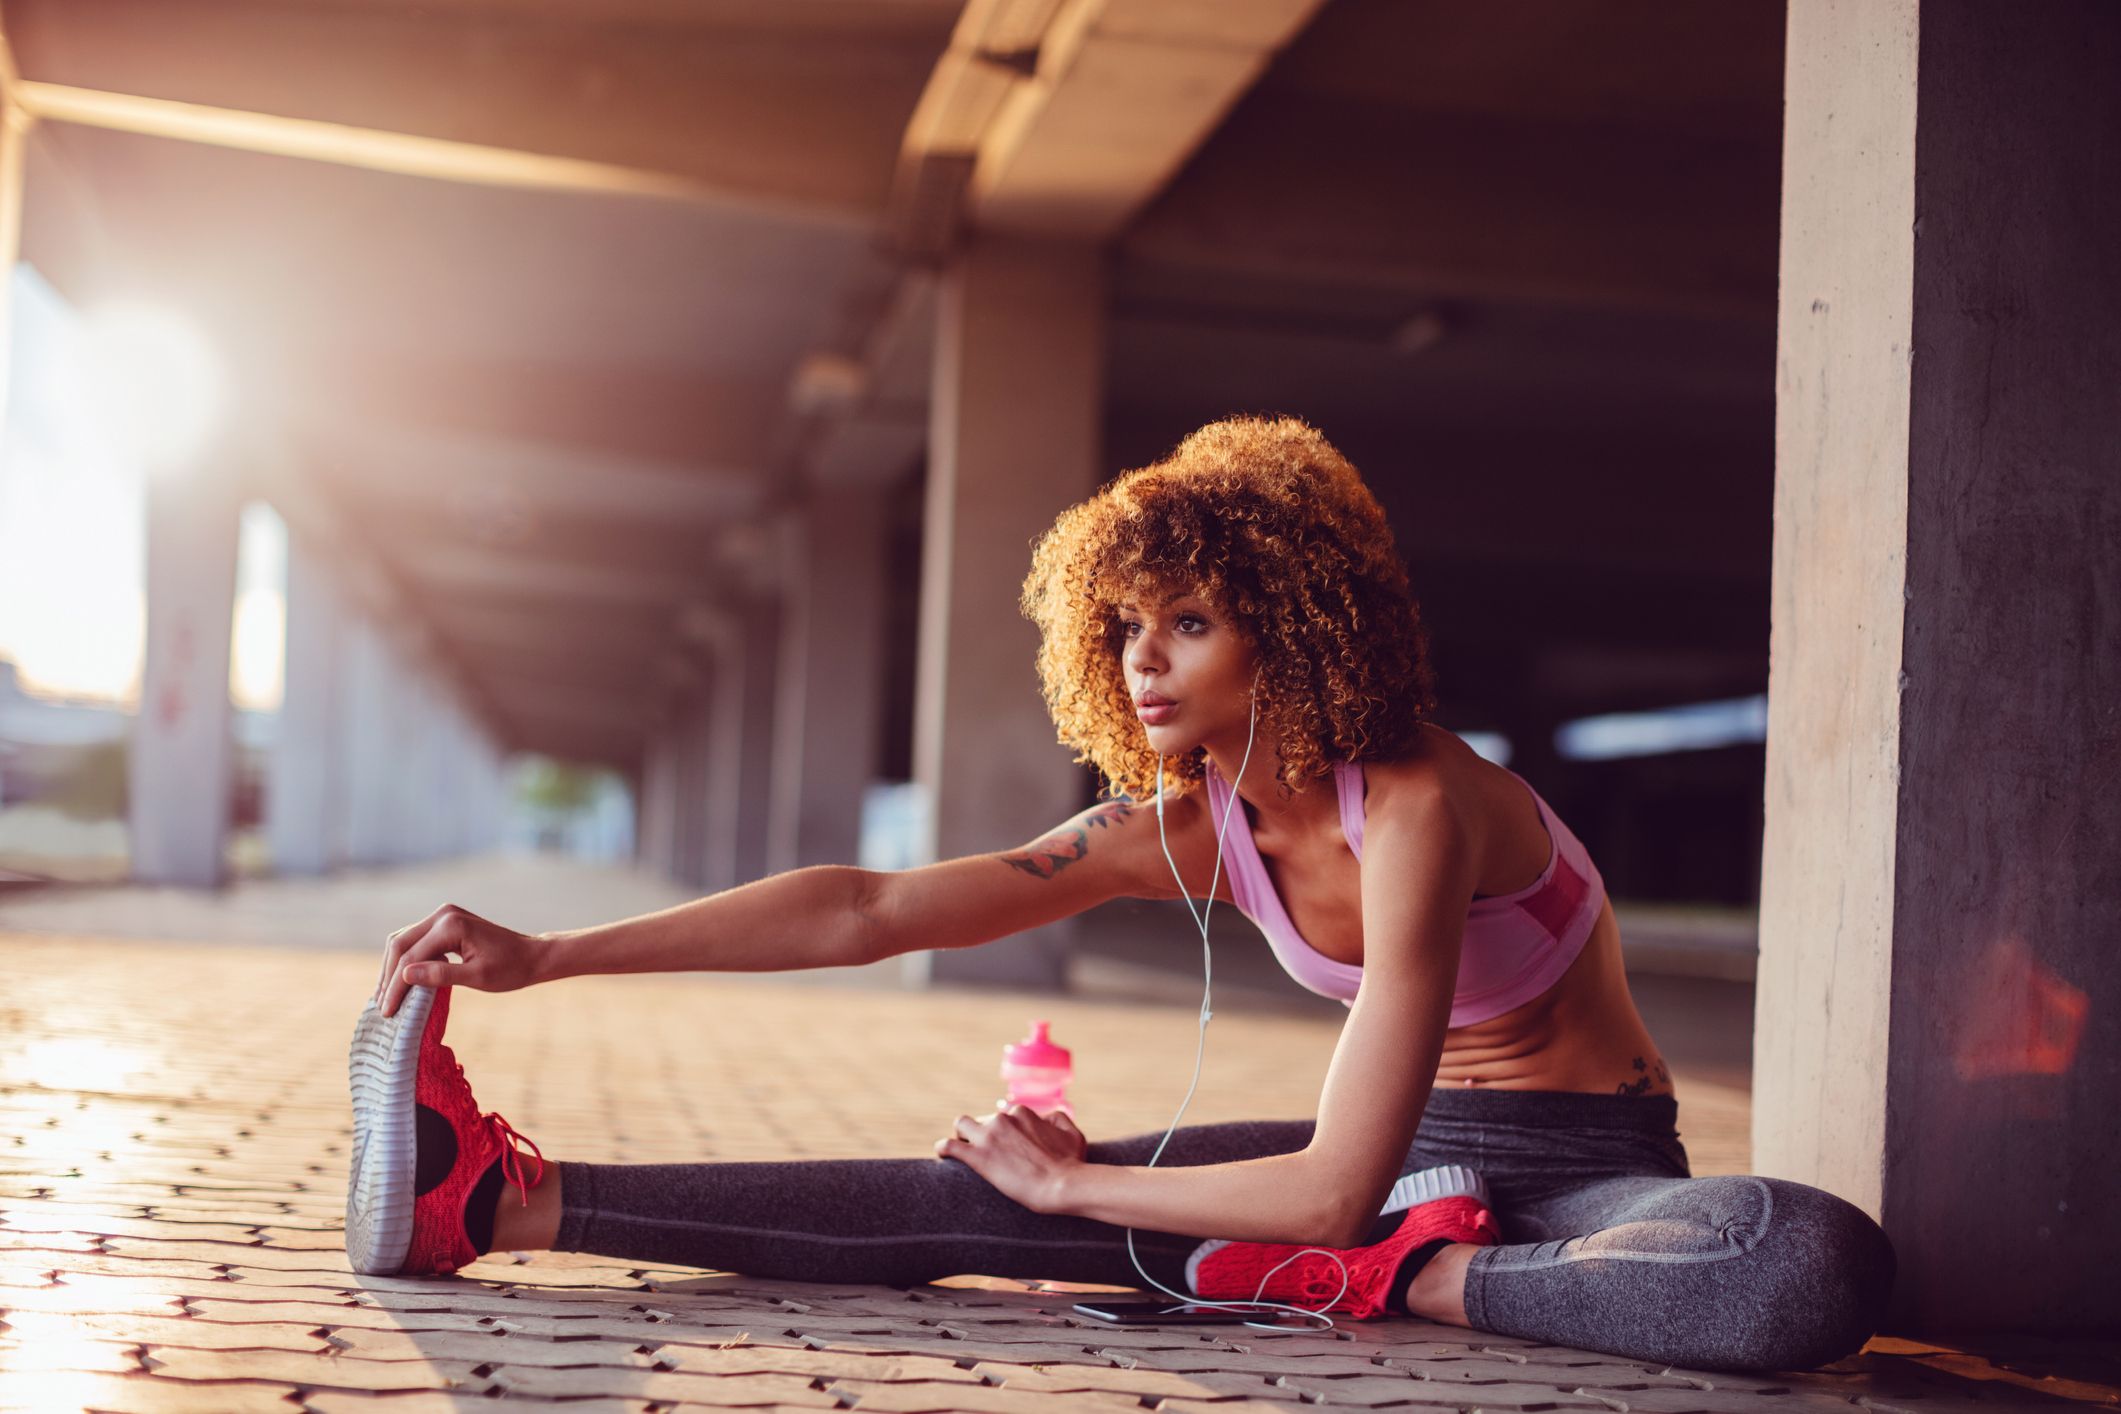 12 Best Fitness Podcasts Of 2022 - Health And Wellness Podcasts